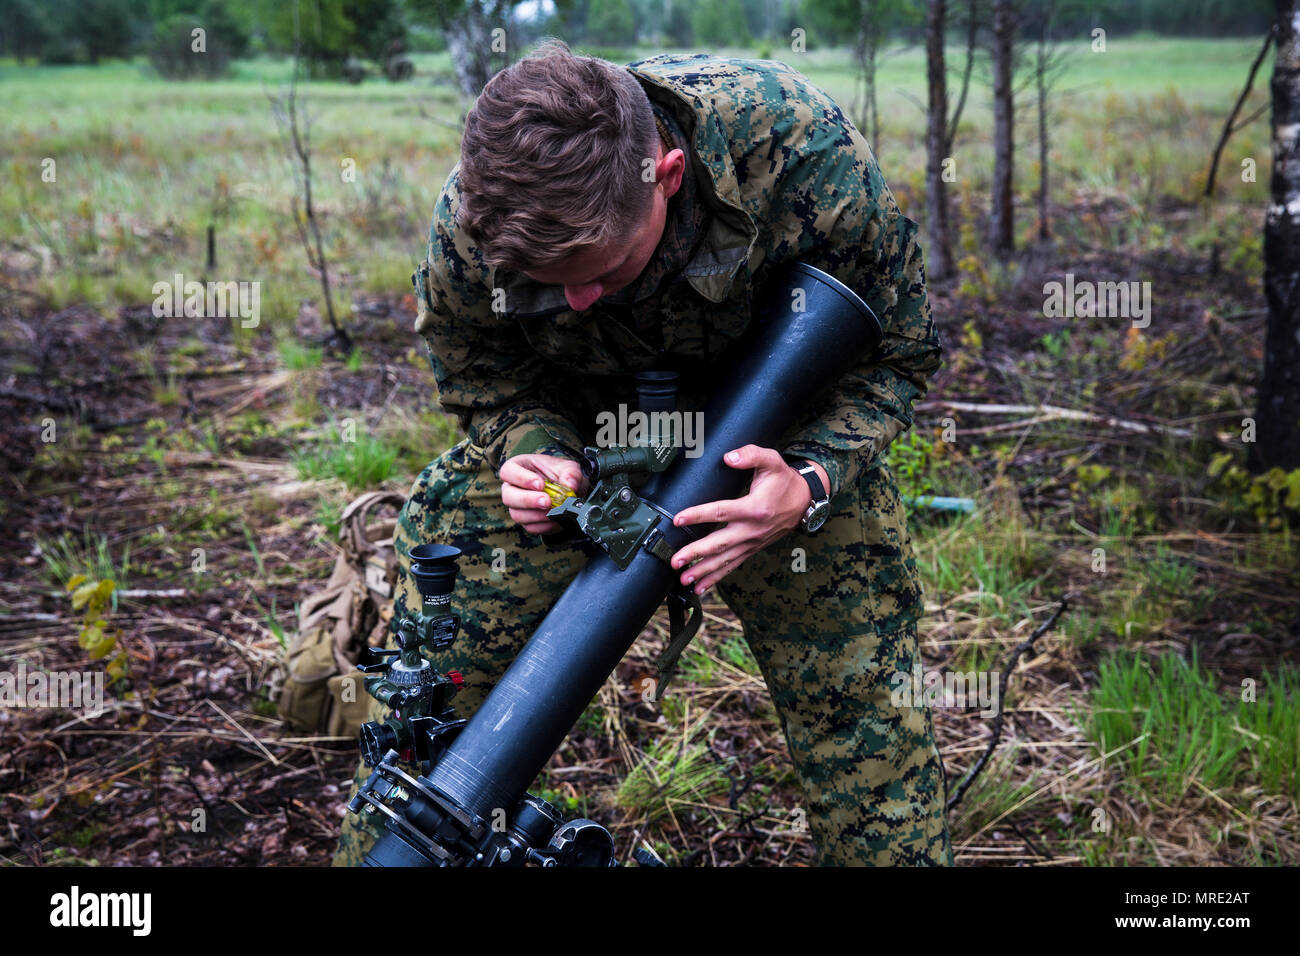 A U.S. Marine with Black Sea Rotational Force 17.1 attached sights to his 81 mm mortar system during Exercise Saber Strike 17 aboard Adazi Military Base, Latvia, June 5, 2017. The exercise is a multinational training evolution designed to increase interoperability between NATO allies and partner nations through combined-arms training. (U.S. Marine Corps photo by Sgt. Patricia A. Morris) Stock Photo